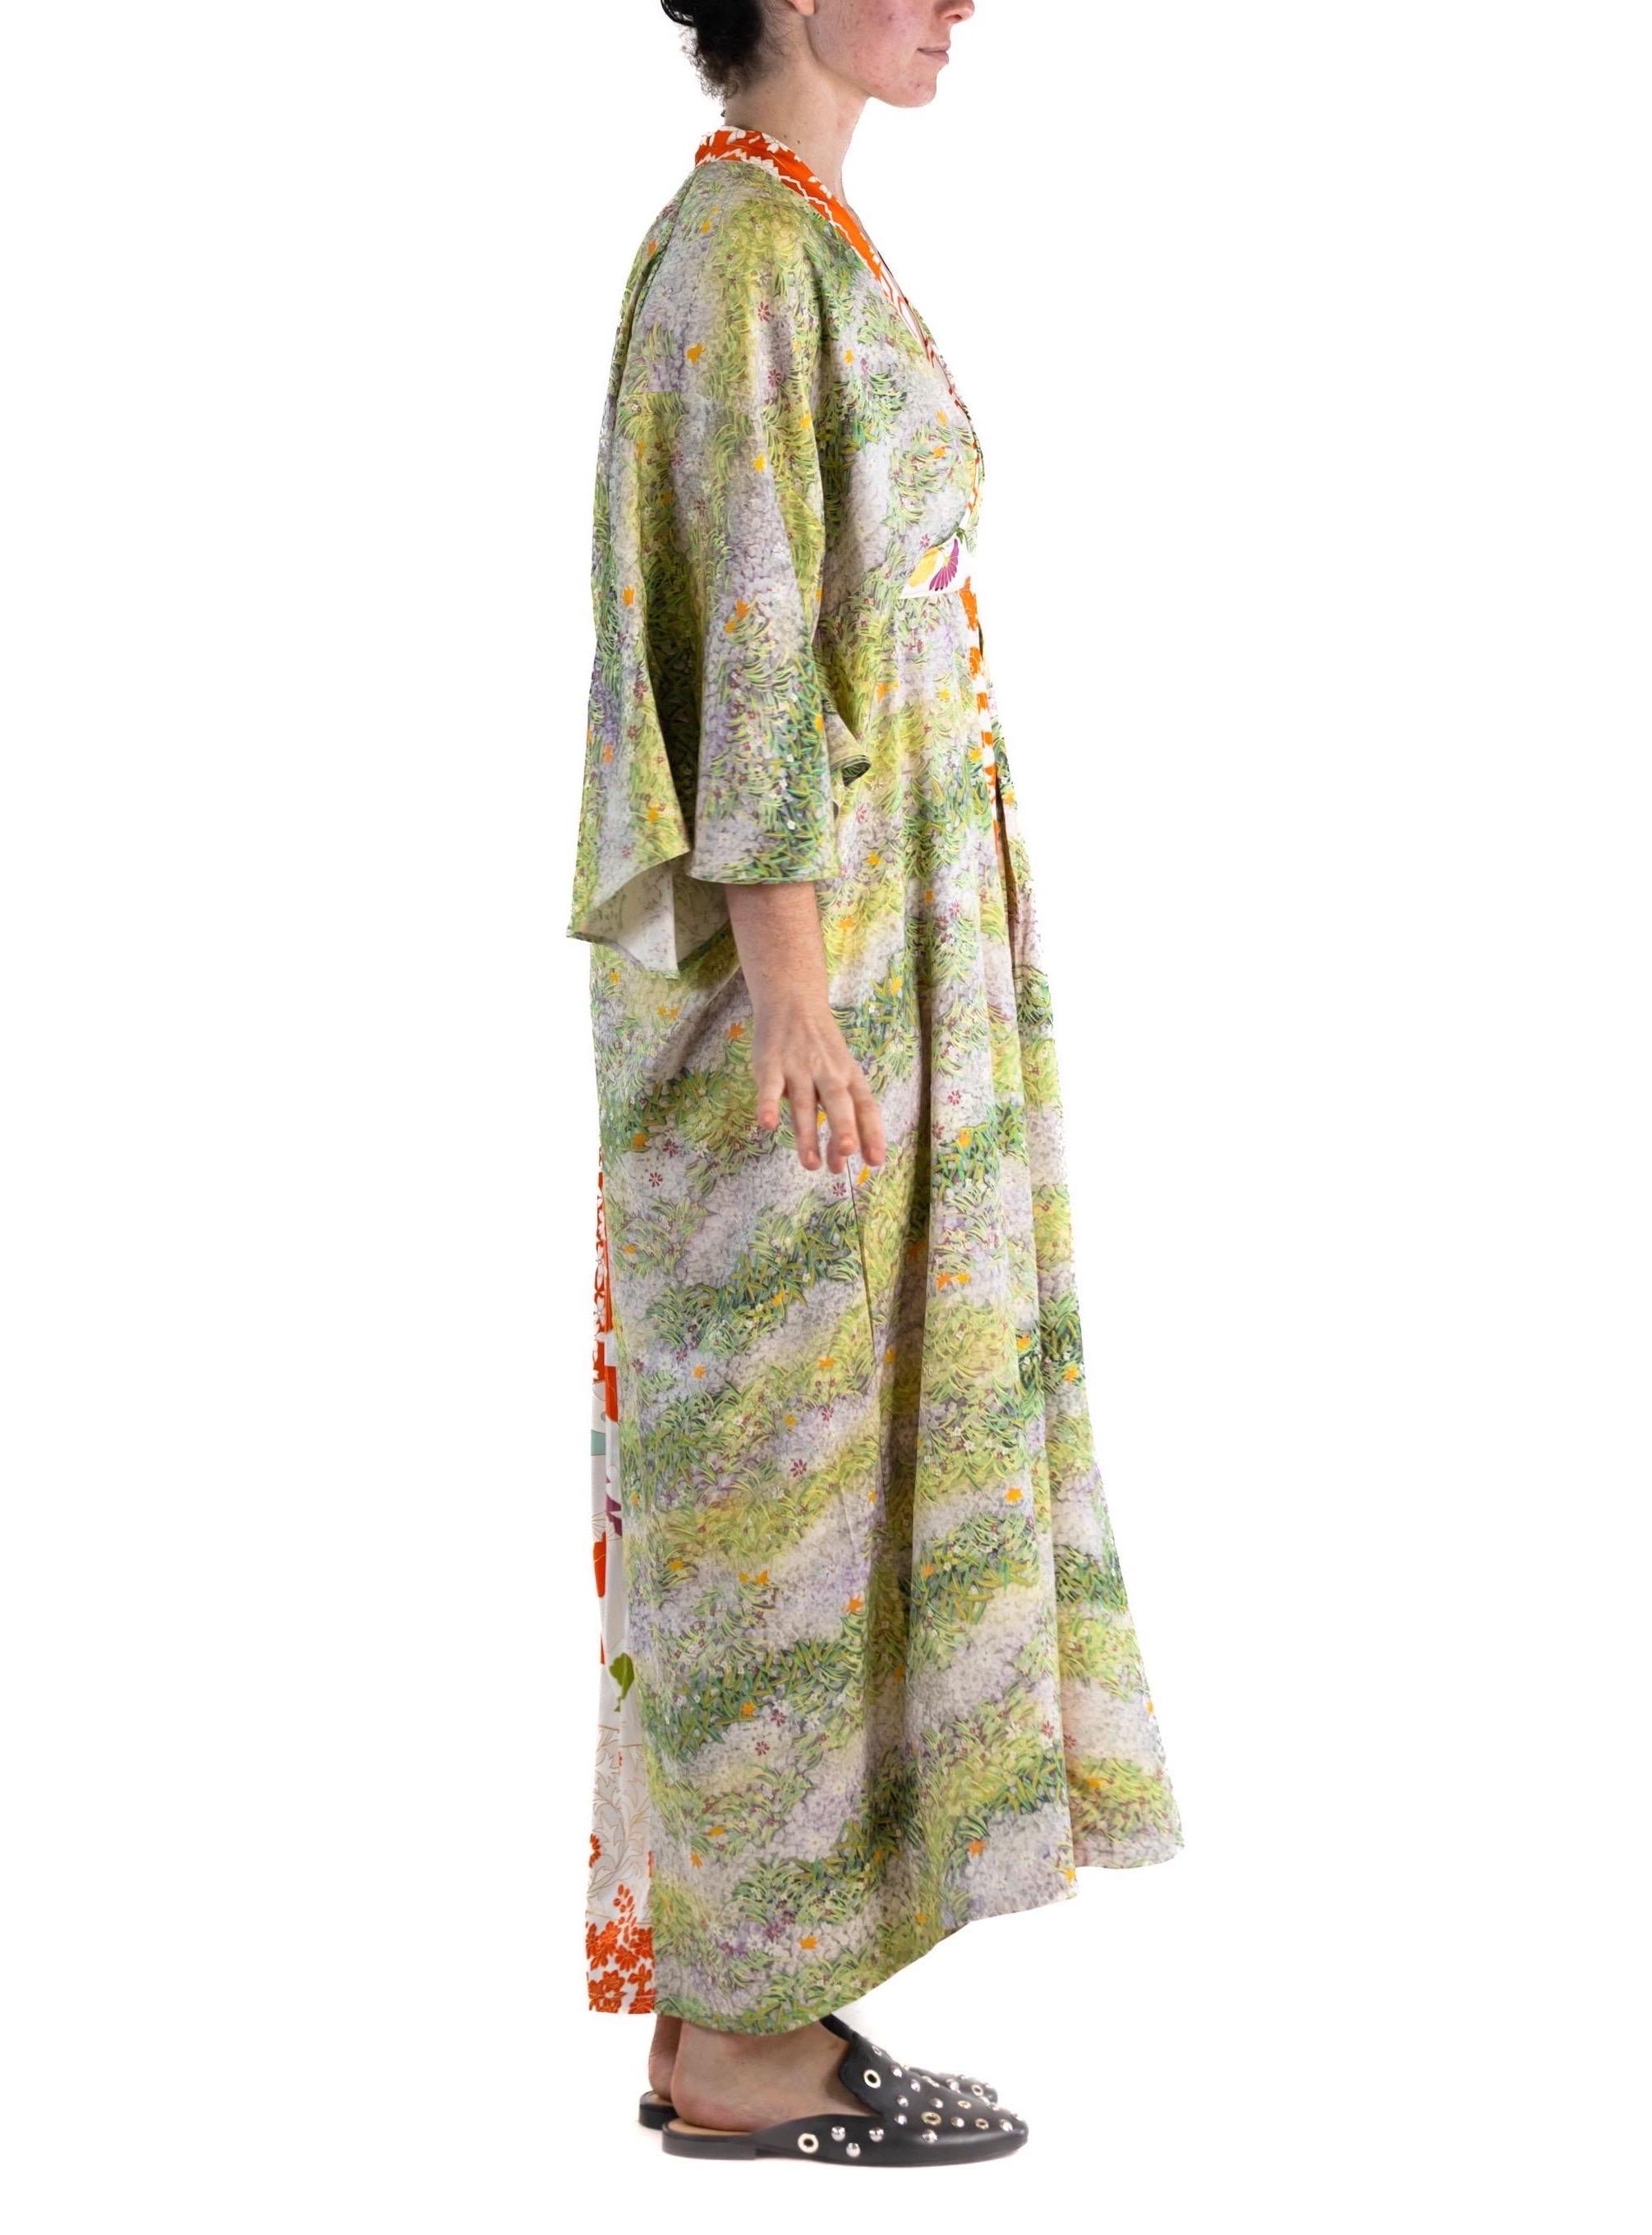 MORPHEW COLLECTION Grass Green Orange Japanese Kimono Silk Kaftan In Excellent Condition For Sale In New York, NY